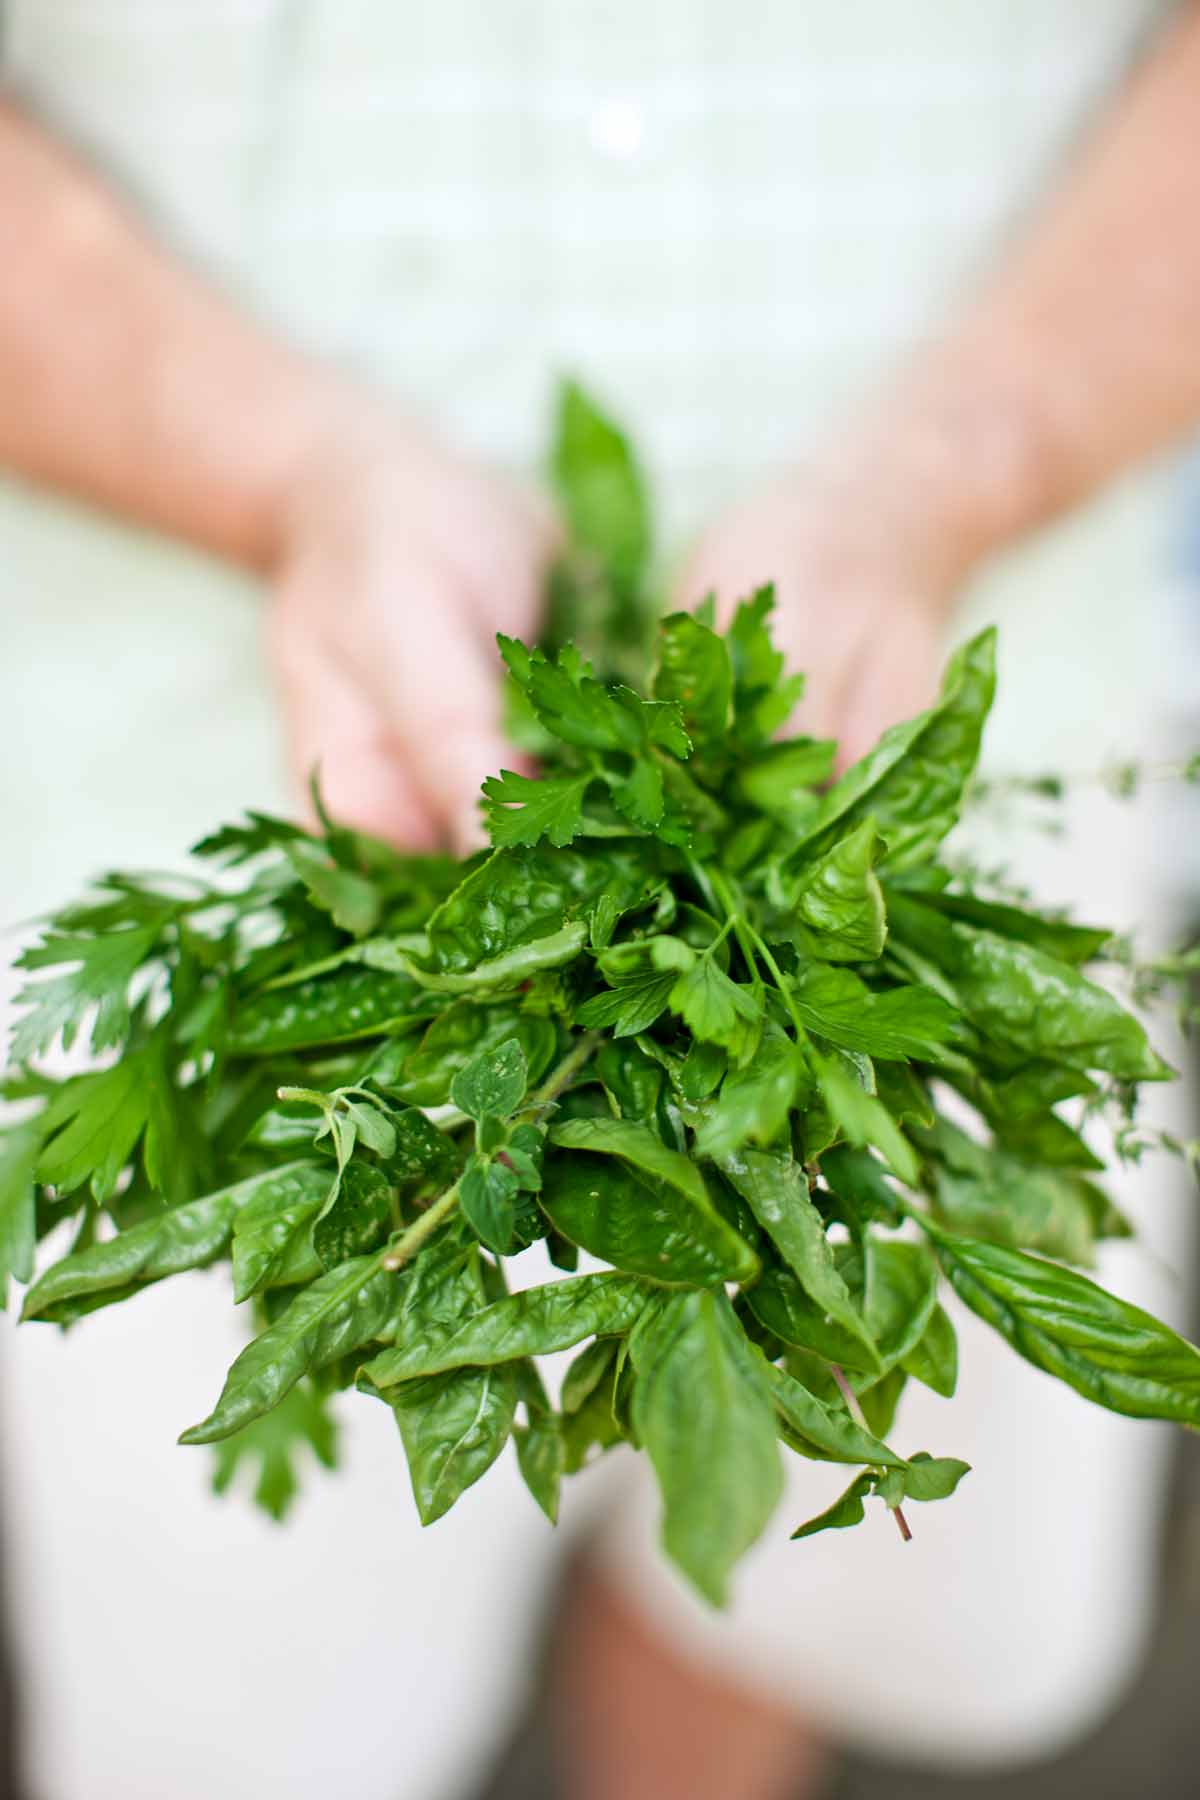 A man's hand holding a bunch of herbs.